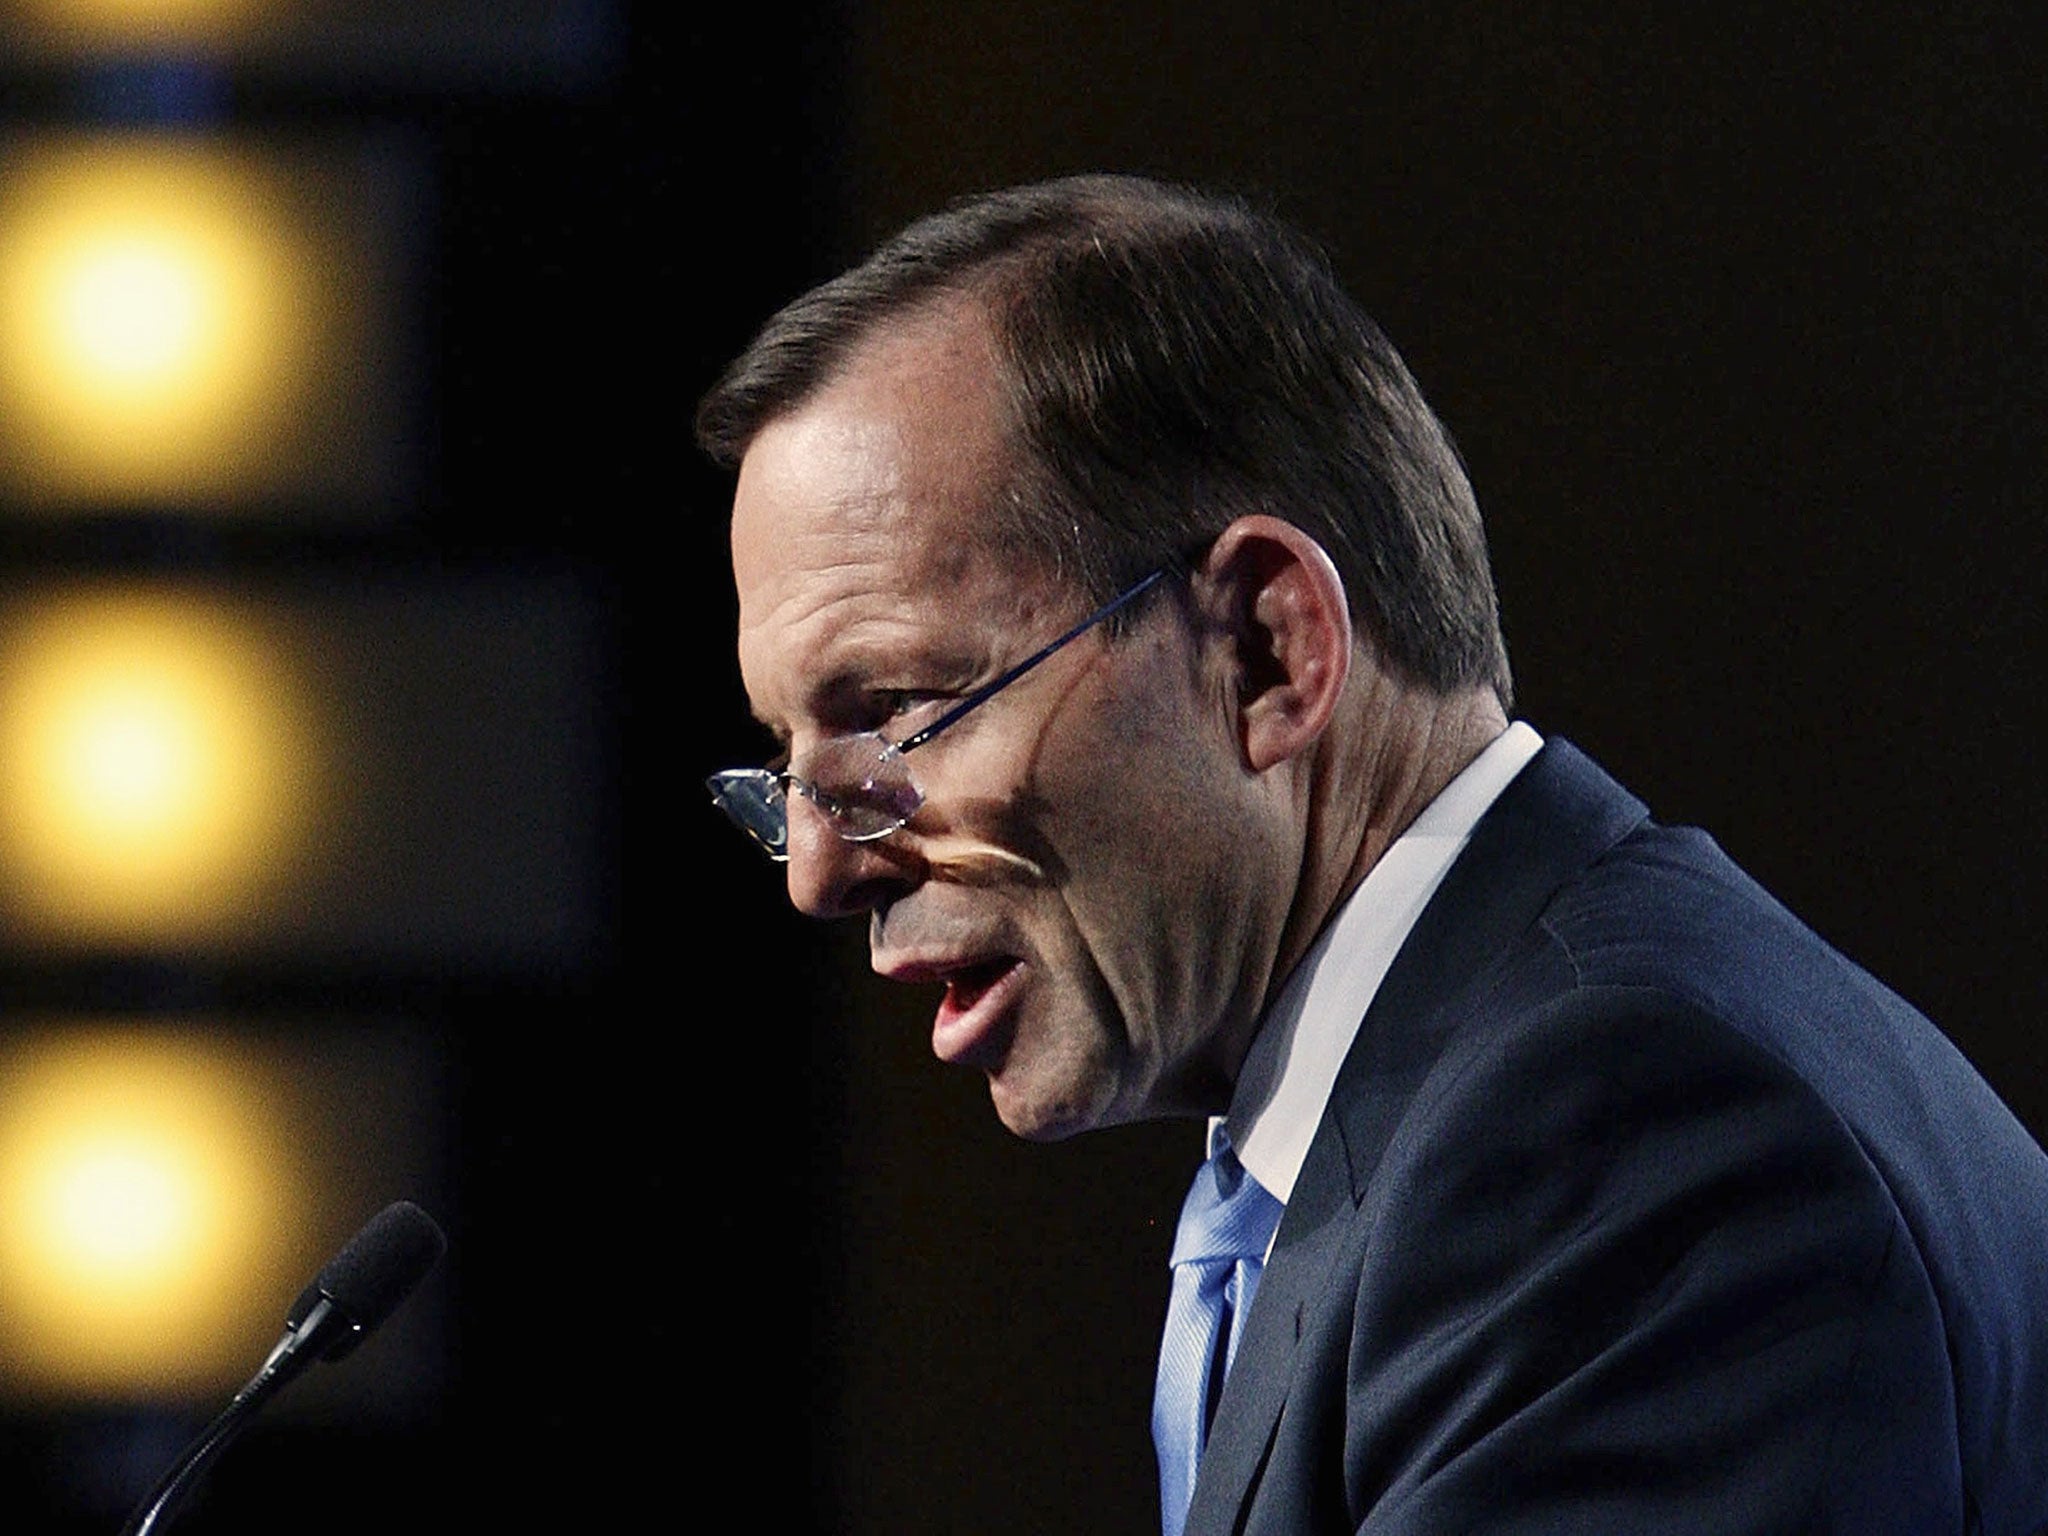 Tony Abbott’s government has scrapped carbon pricing